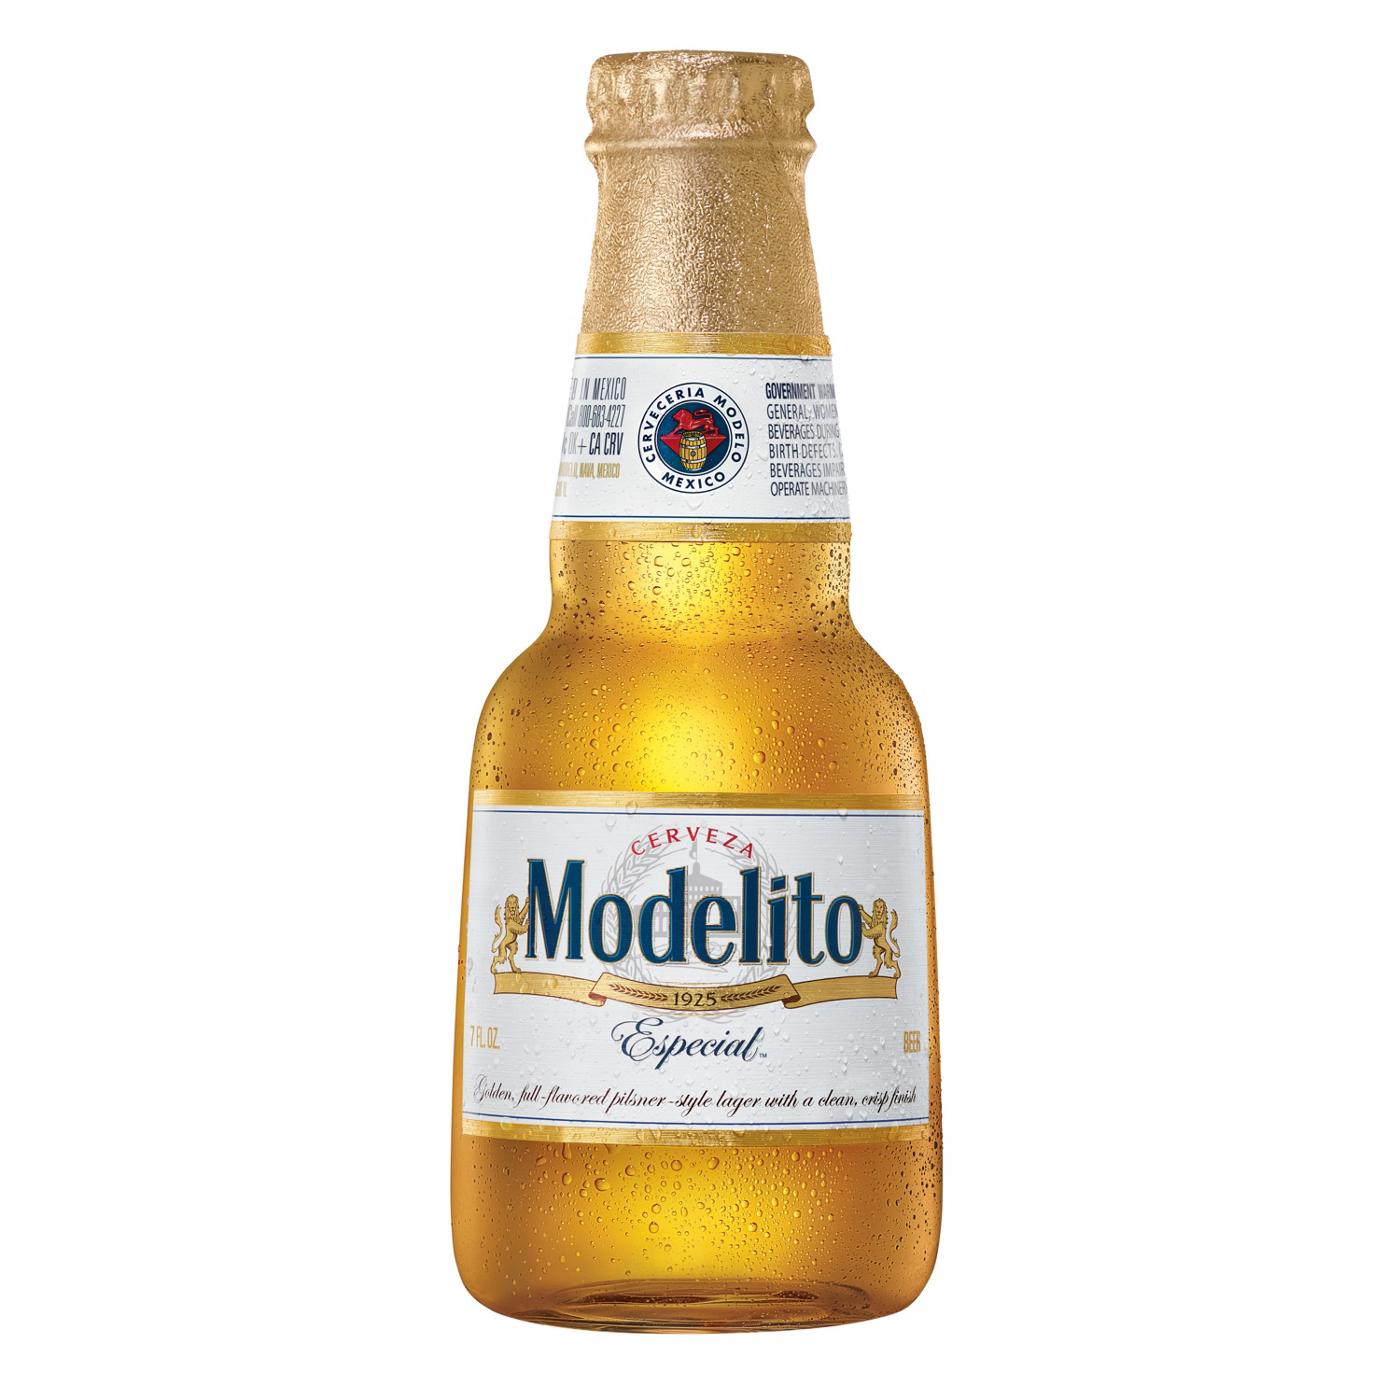 Modelo Especial Modelito Mexican Lager Import Beer 7 oz Bottles, 24 pk; image 2 of 11